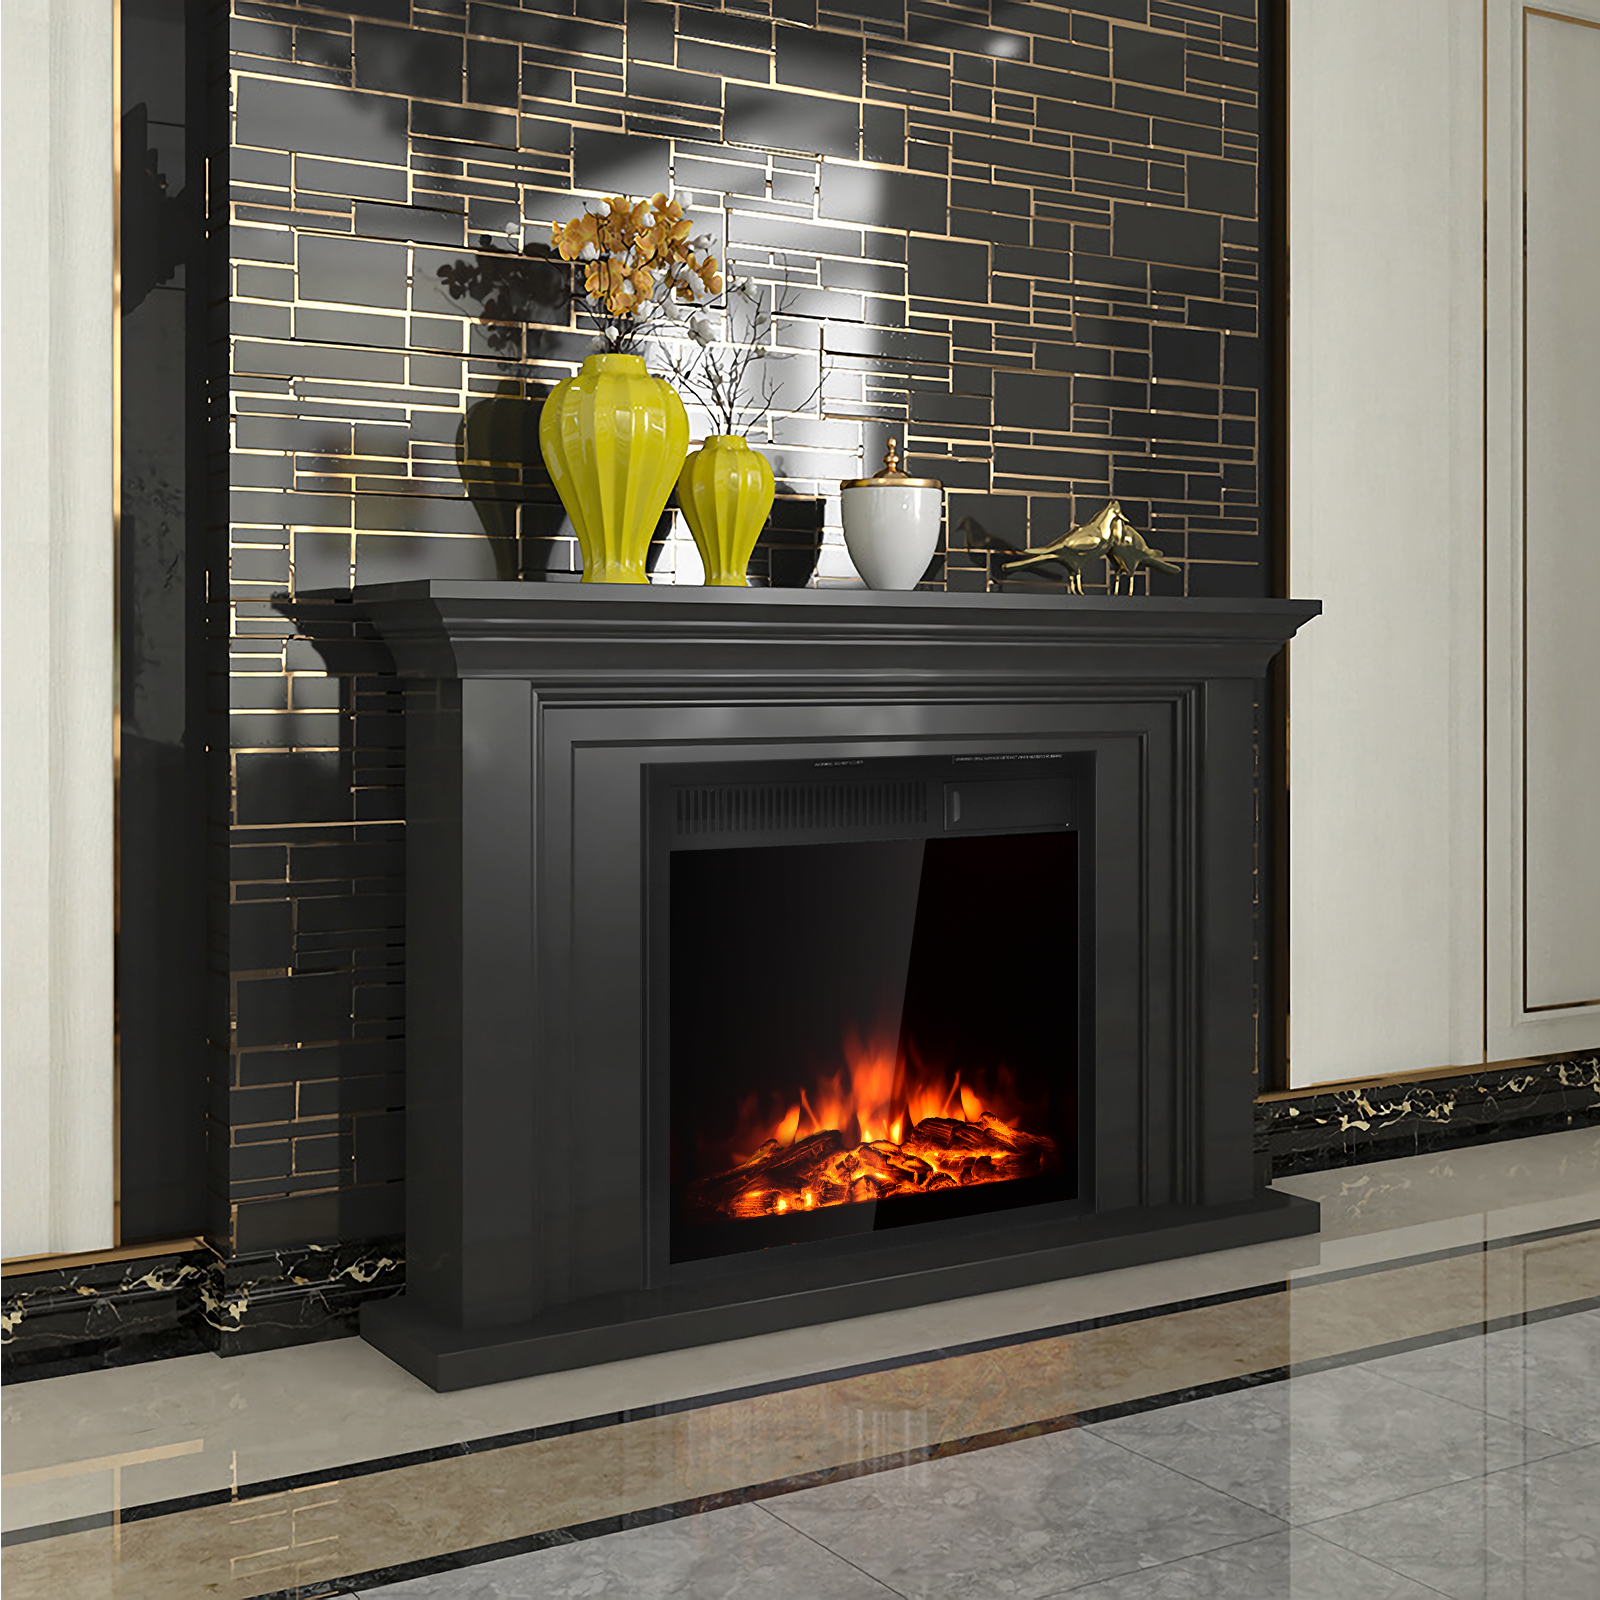 Topbuy Freestanding & Recessed Electric Fireplace Heater with Remote Control